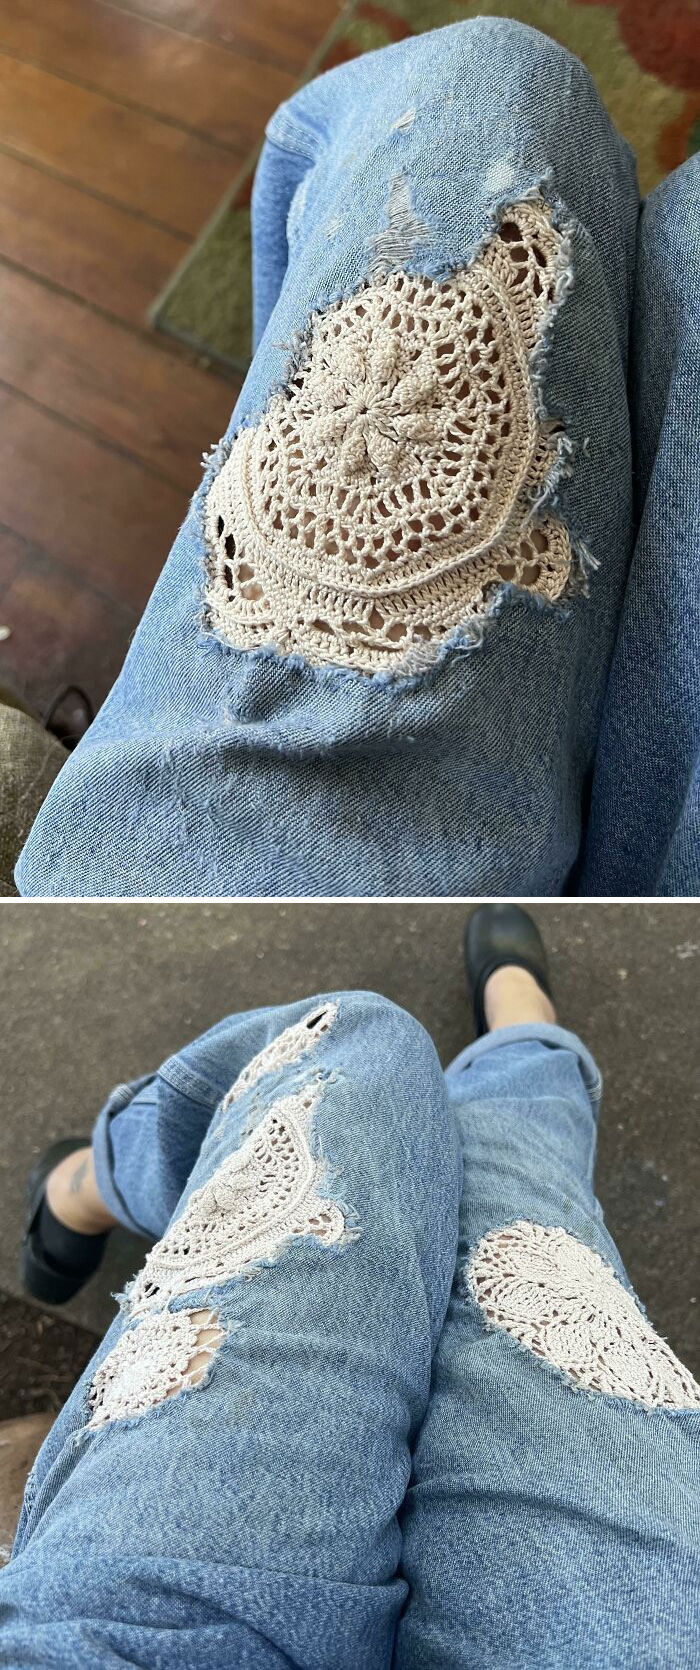 My Favorite Overalls Might Eventually Be More Crochet Cotton Than Denim